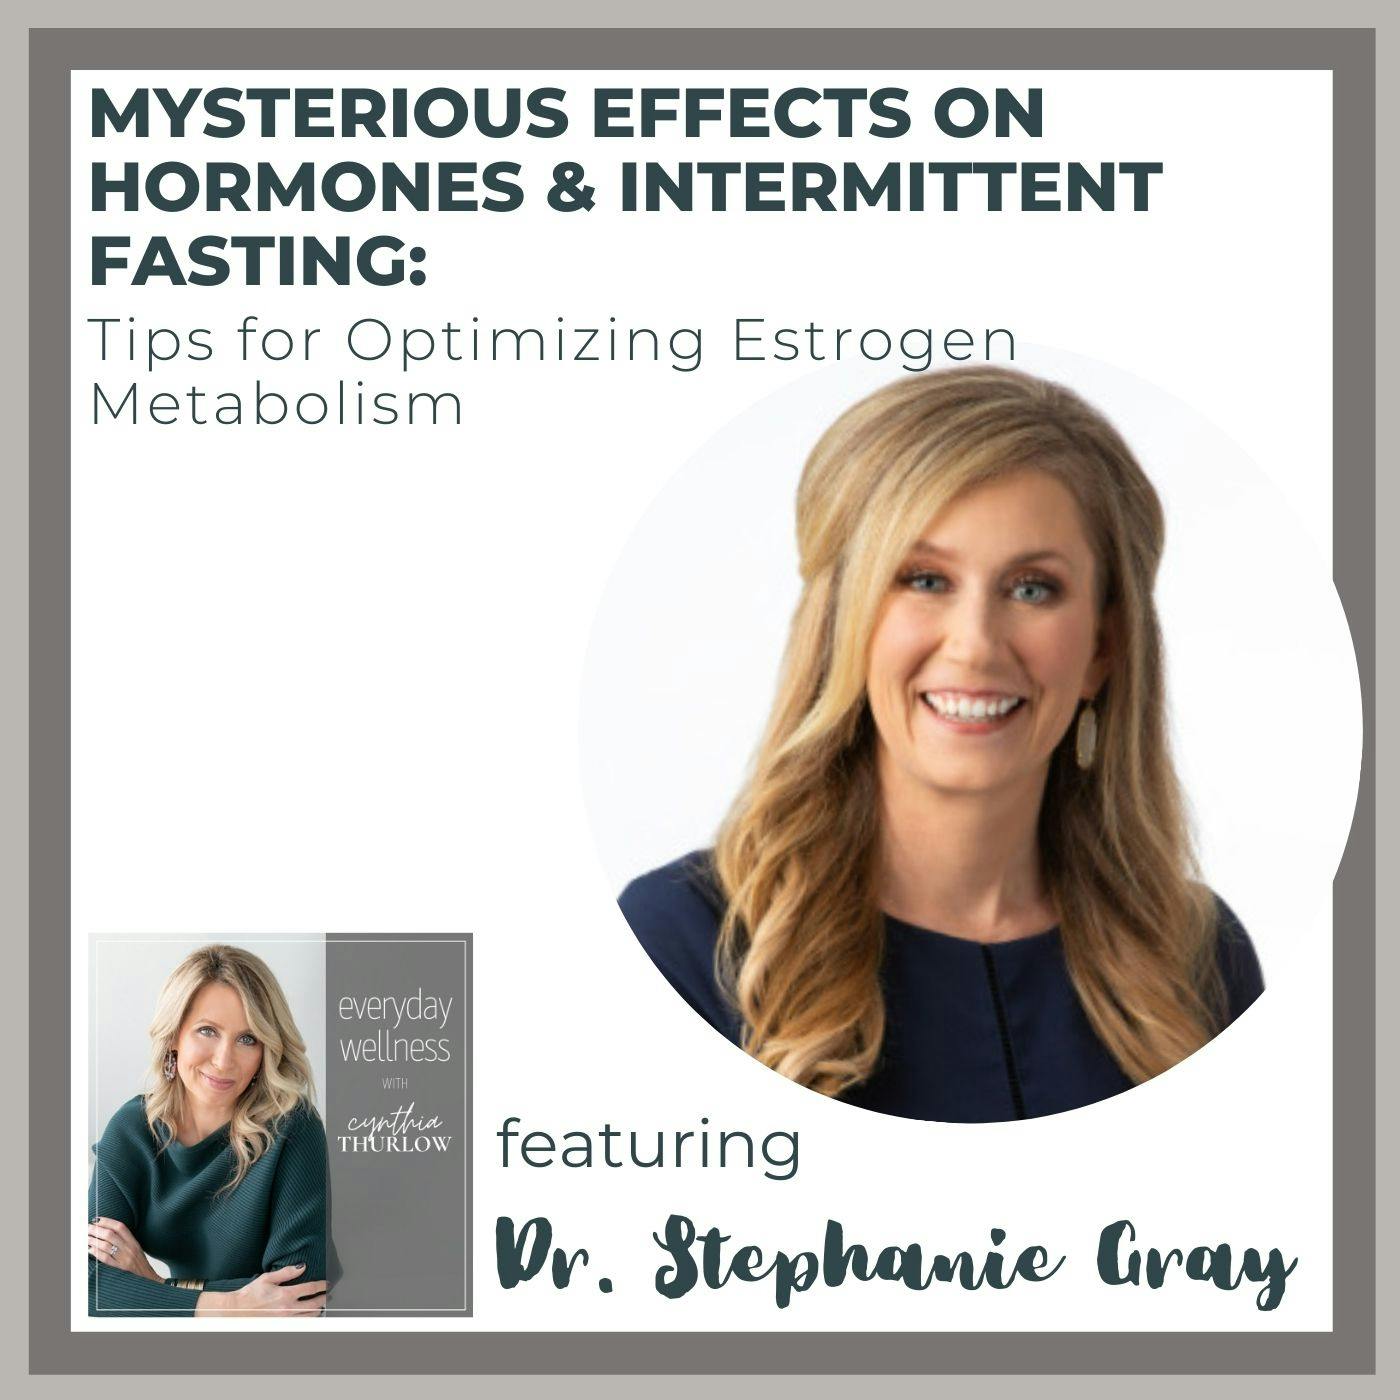 Ep. 156 Mysterious Effects On Hormones & Intermittent Fasting: Tips for Optimizing Estrogen Metabolism with Dr. Stephanie Gray